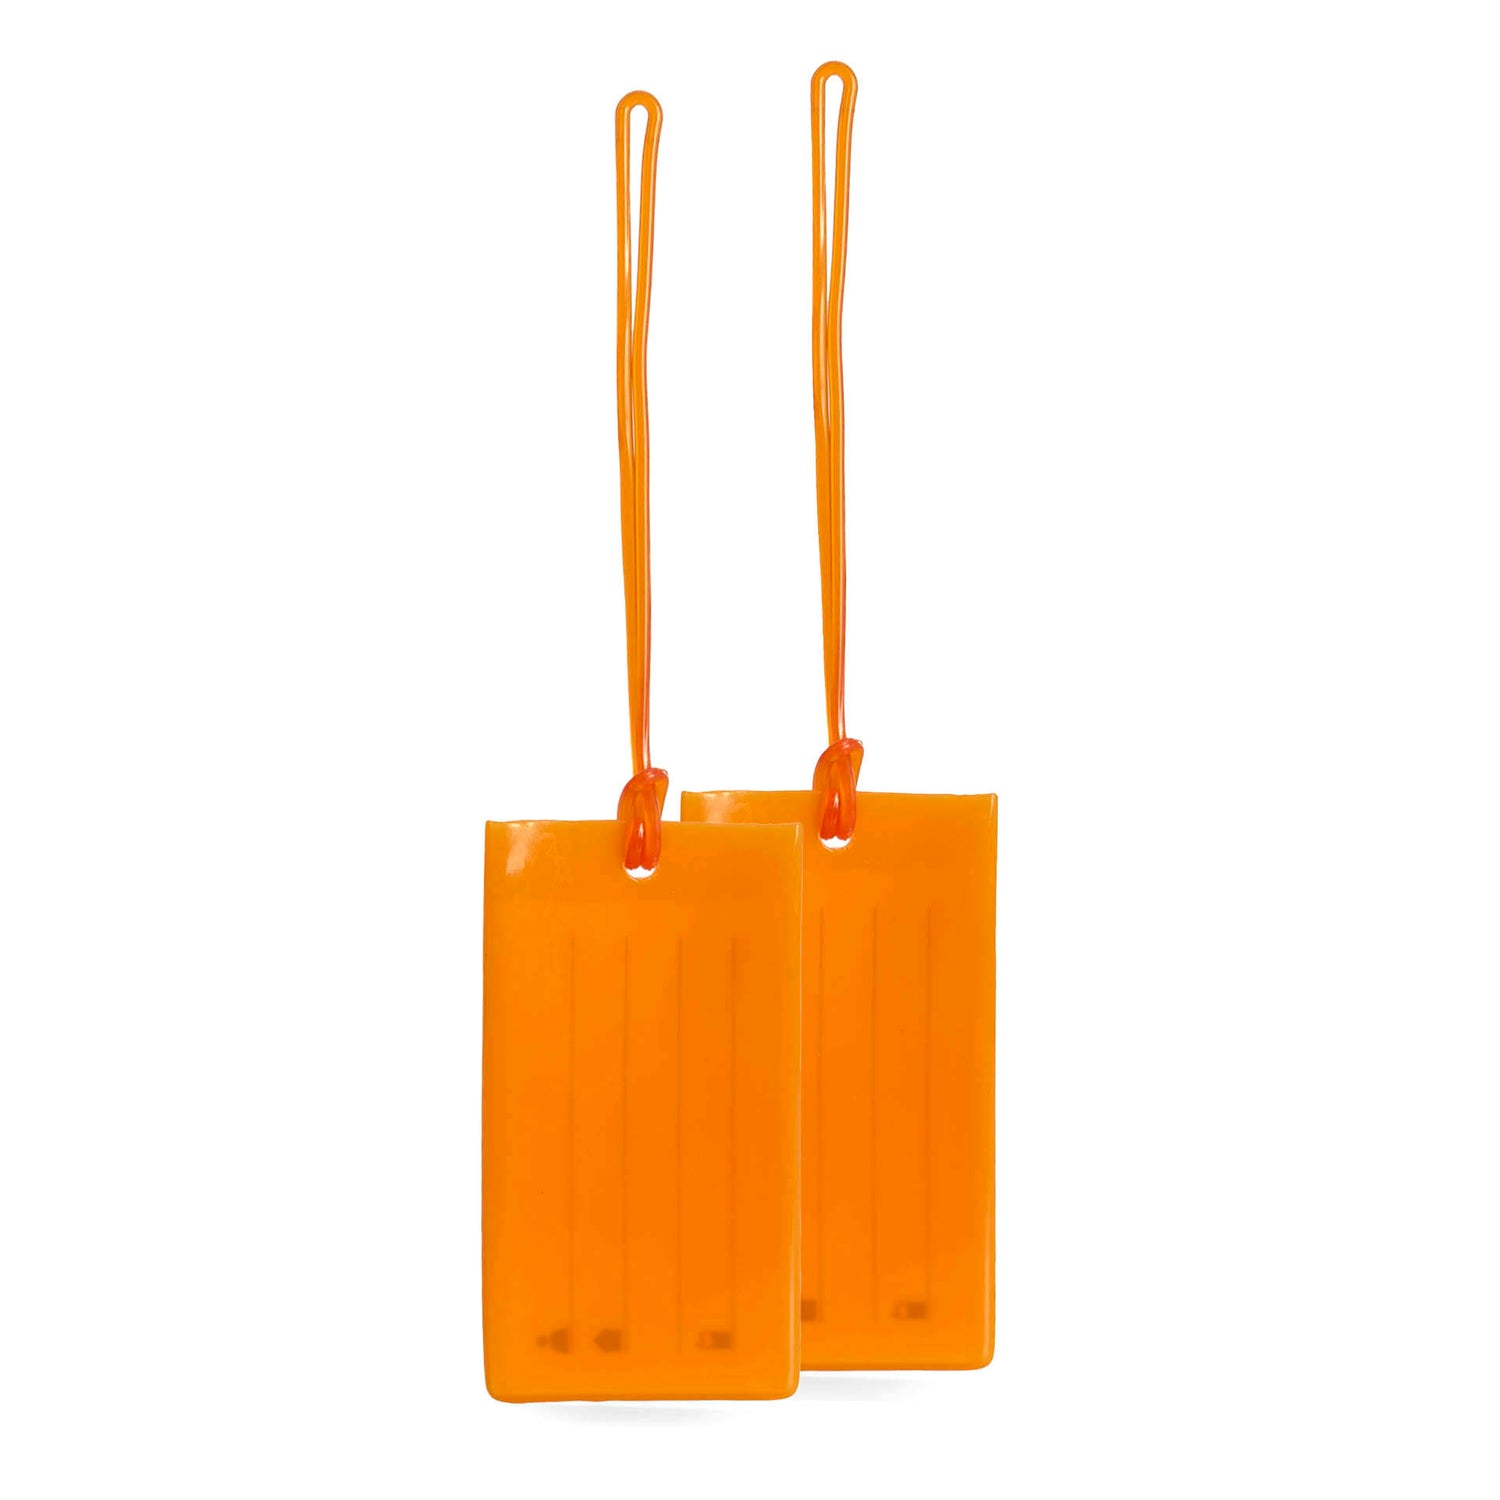 2 orange luggage tags in a jelly material with elastic bands knotted around it in the same colour.